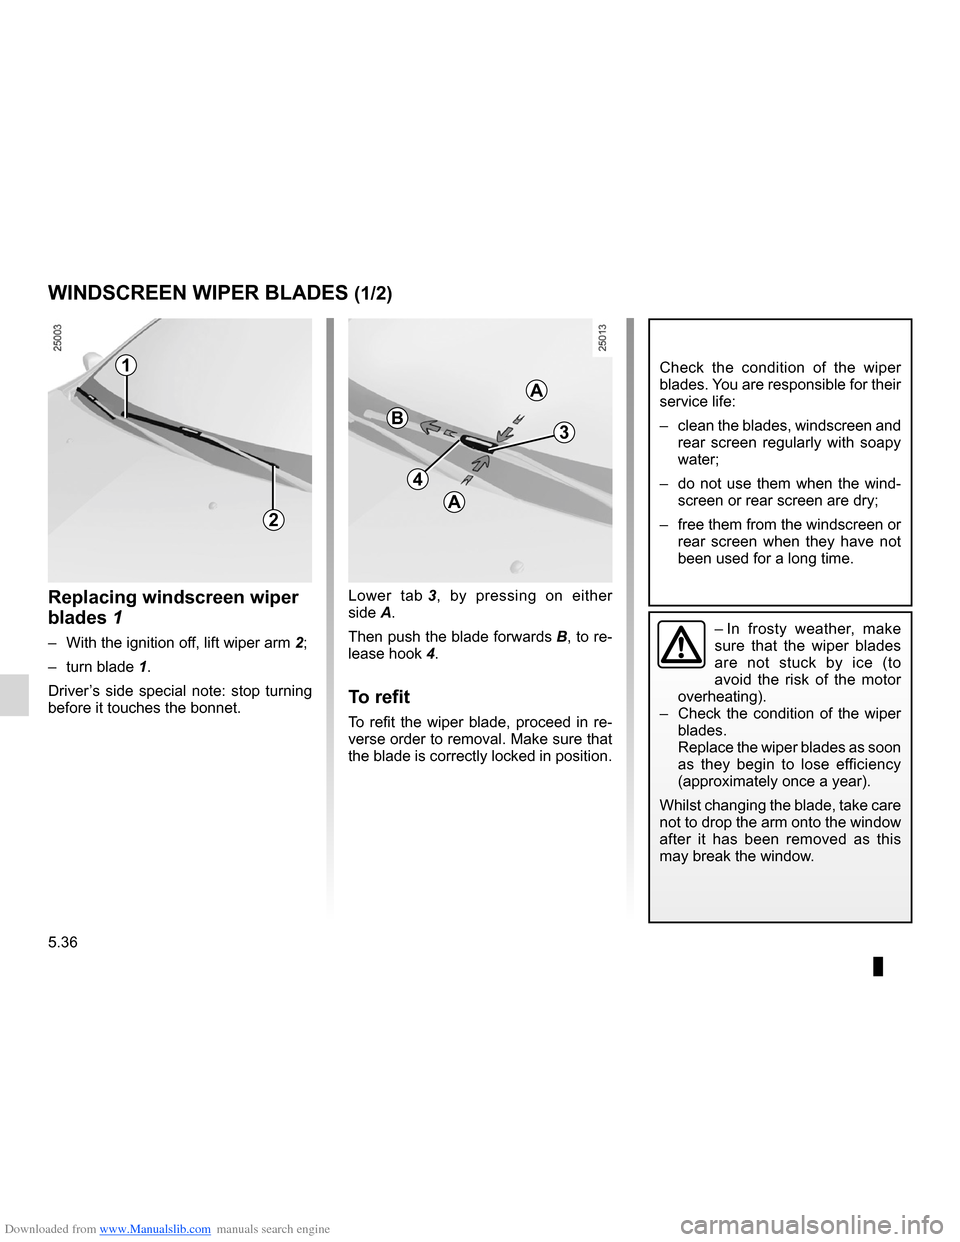 RENAULT CLIO 2012 X85 / 3.G Owners Guide Downloaded from www.Manualslib.com manuals search engine wiper blades ......................................... (up to the end of the DU)
wipers blades  ............................................. (